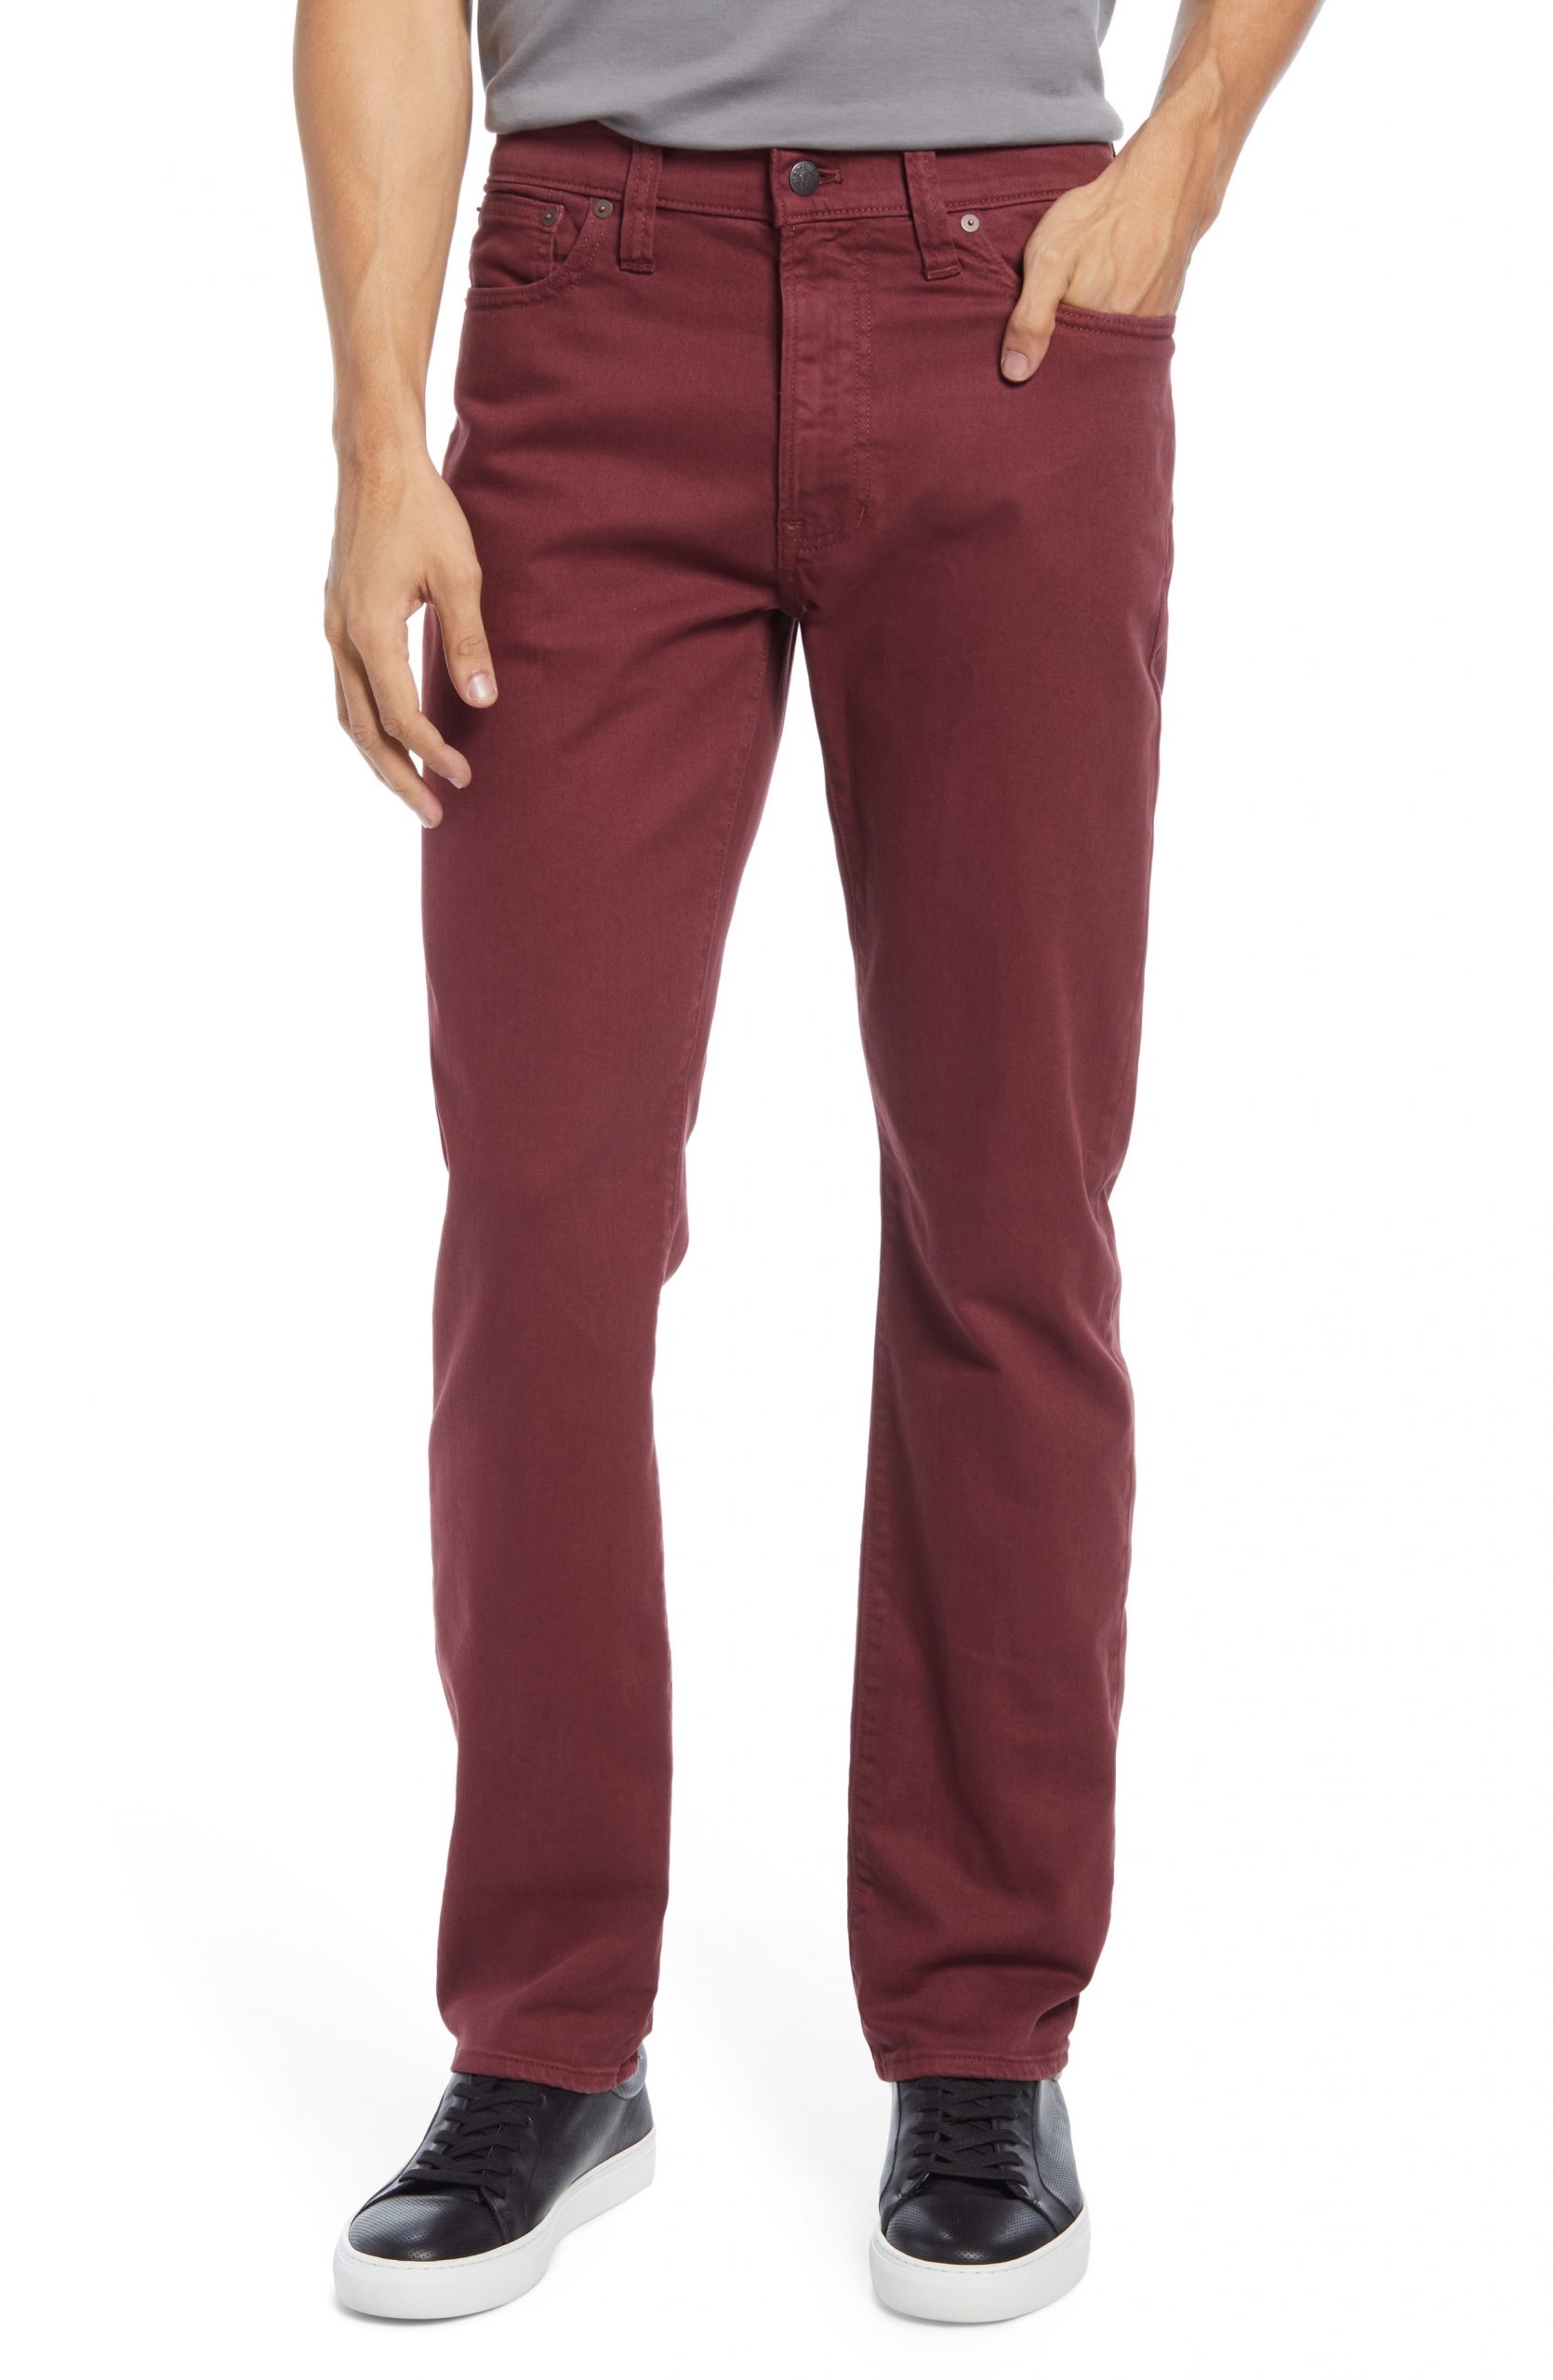 Men’s Madewell Garment Dyed Slim Fit Jeans, Size 28 x 32 - Red | The ...